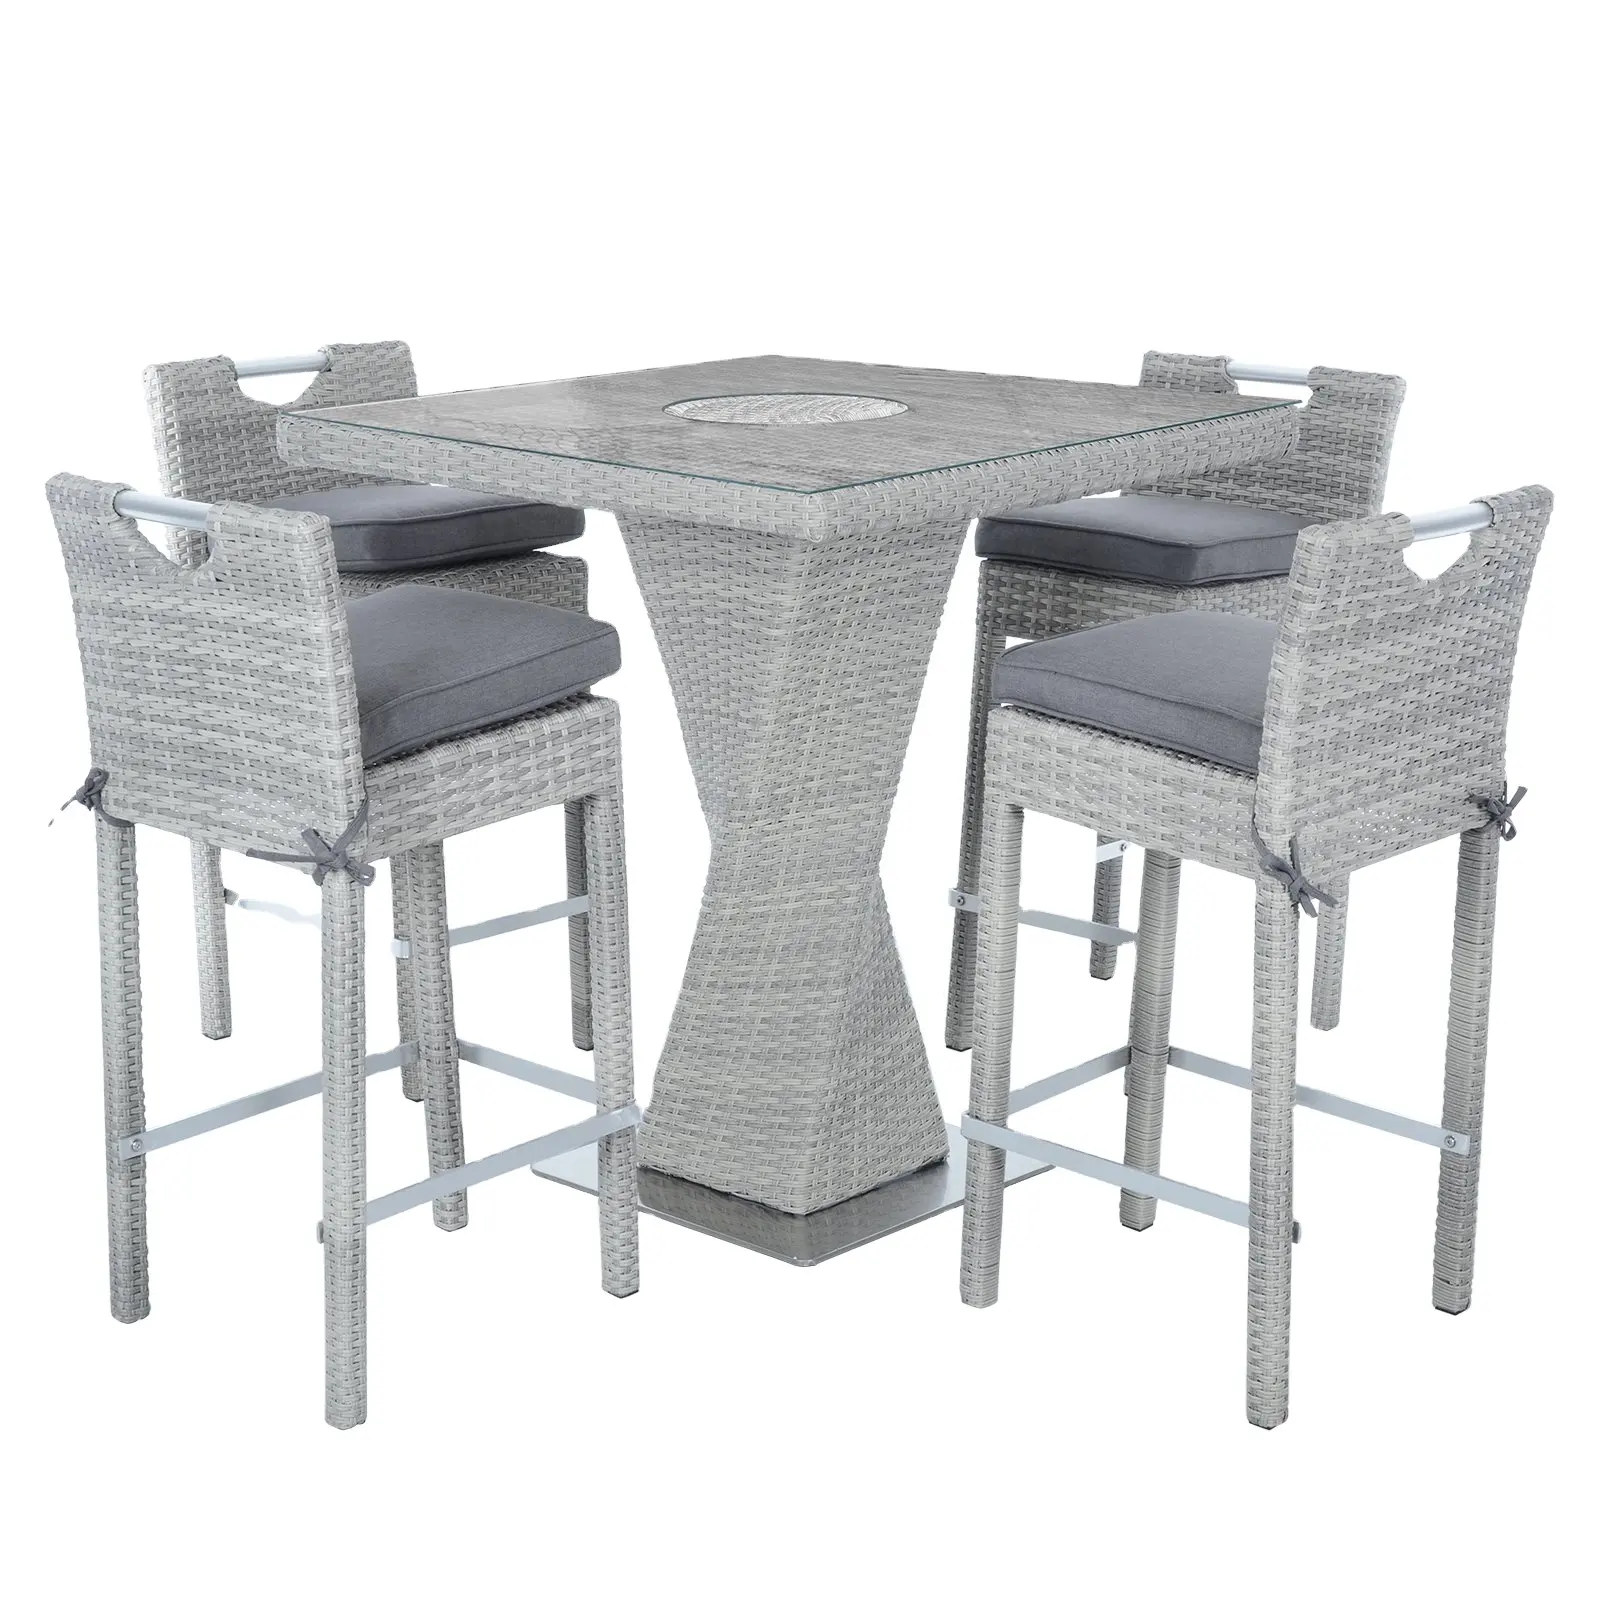 Bar stools and tables are available in a variety of designs and styles that are sure to impress your friends and loved ones